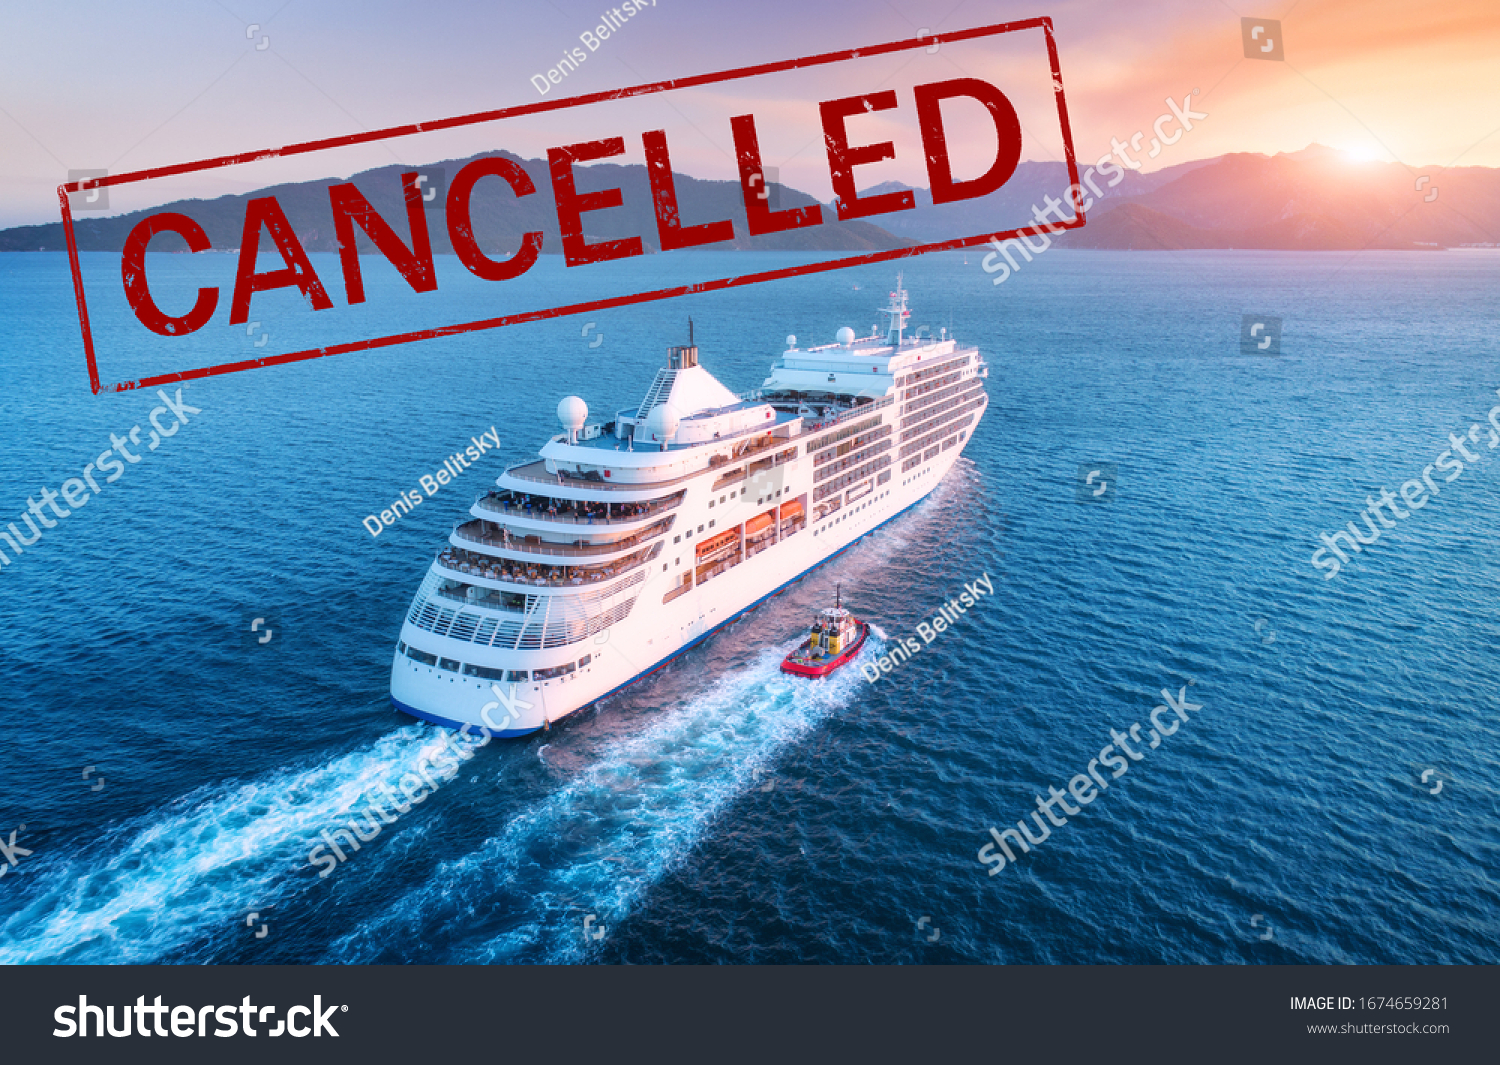 Cruise ship travel holidays cancelled because of epidemic of coronavirus. Crisis in the cruise industry. Cruise cancellation because of pandemic of Covid-19. Quarantine in cruise liner. Red text #1674659281